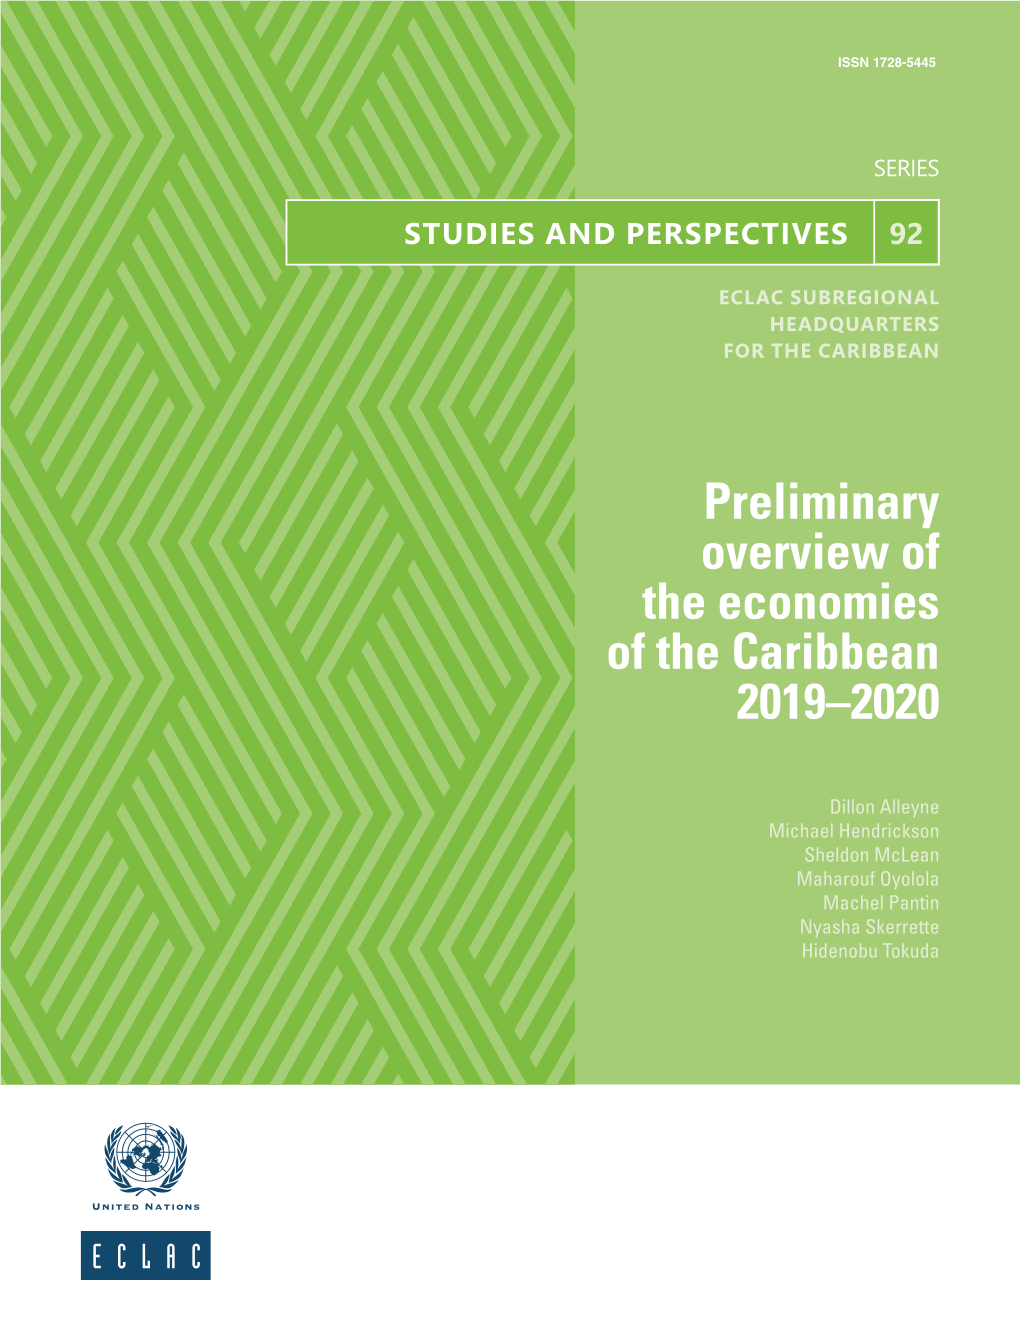 Preliminary Overview of the Economies of the Caribbean 2019-2020